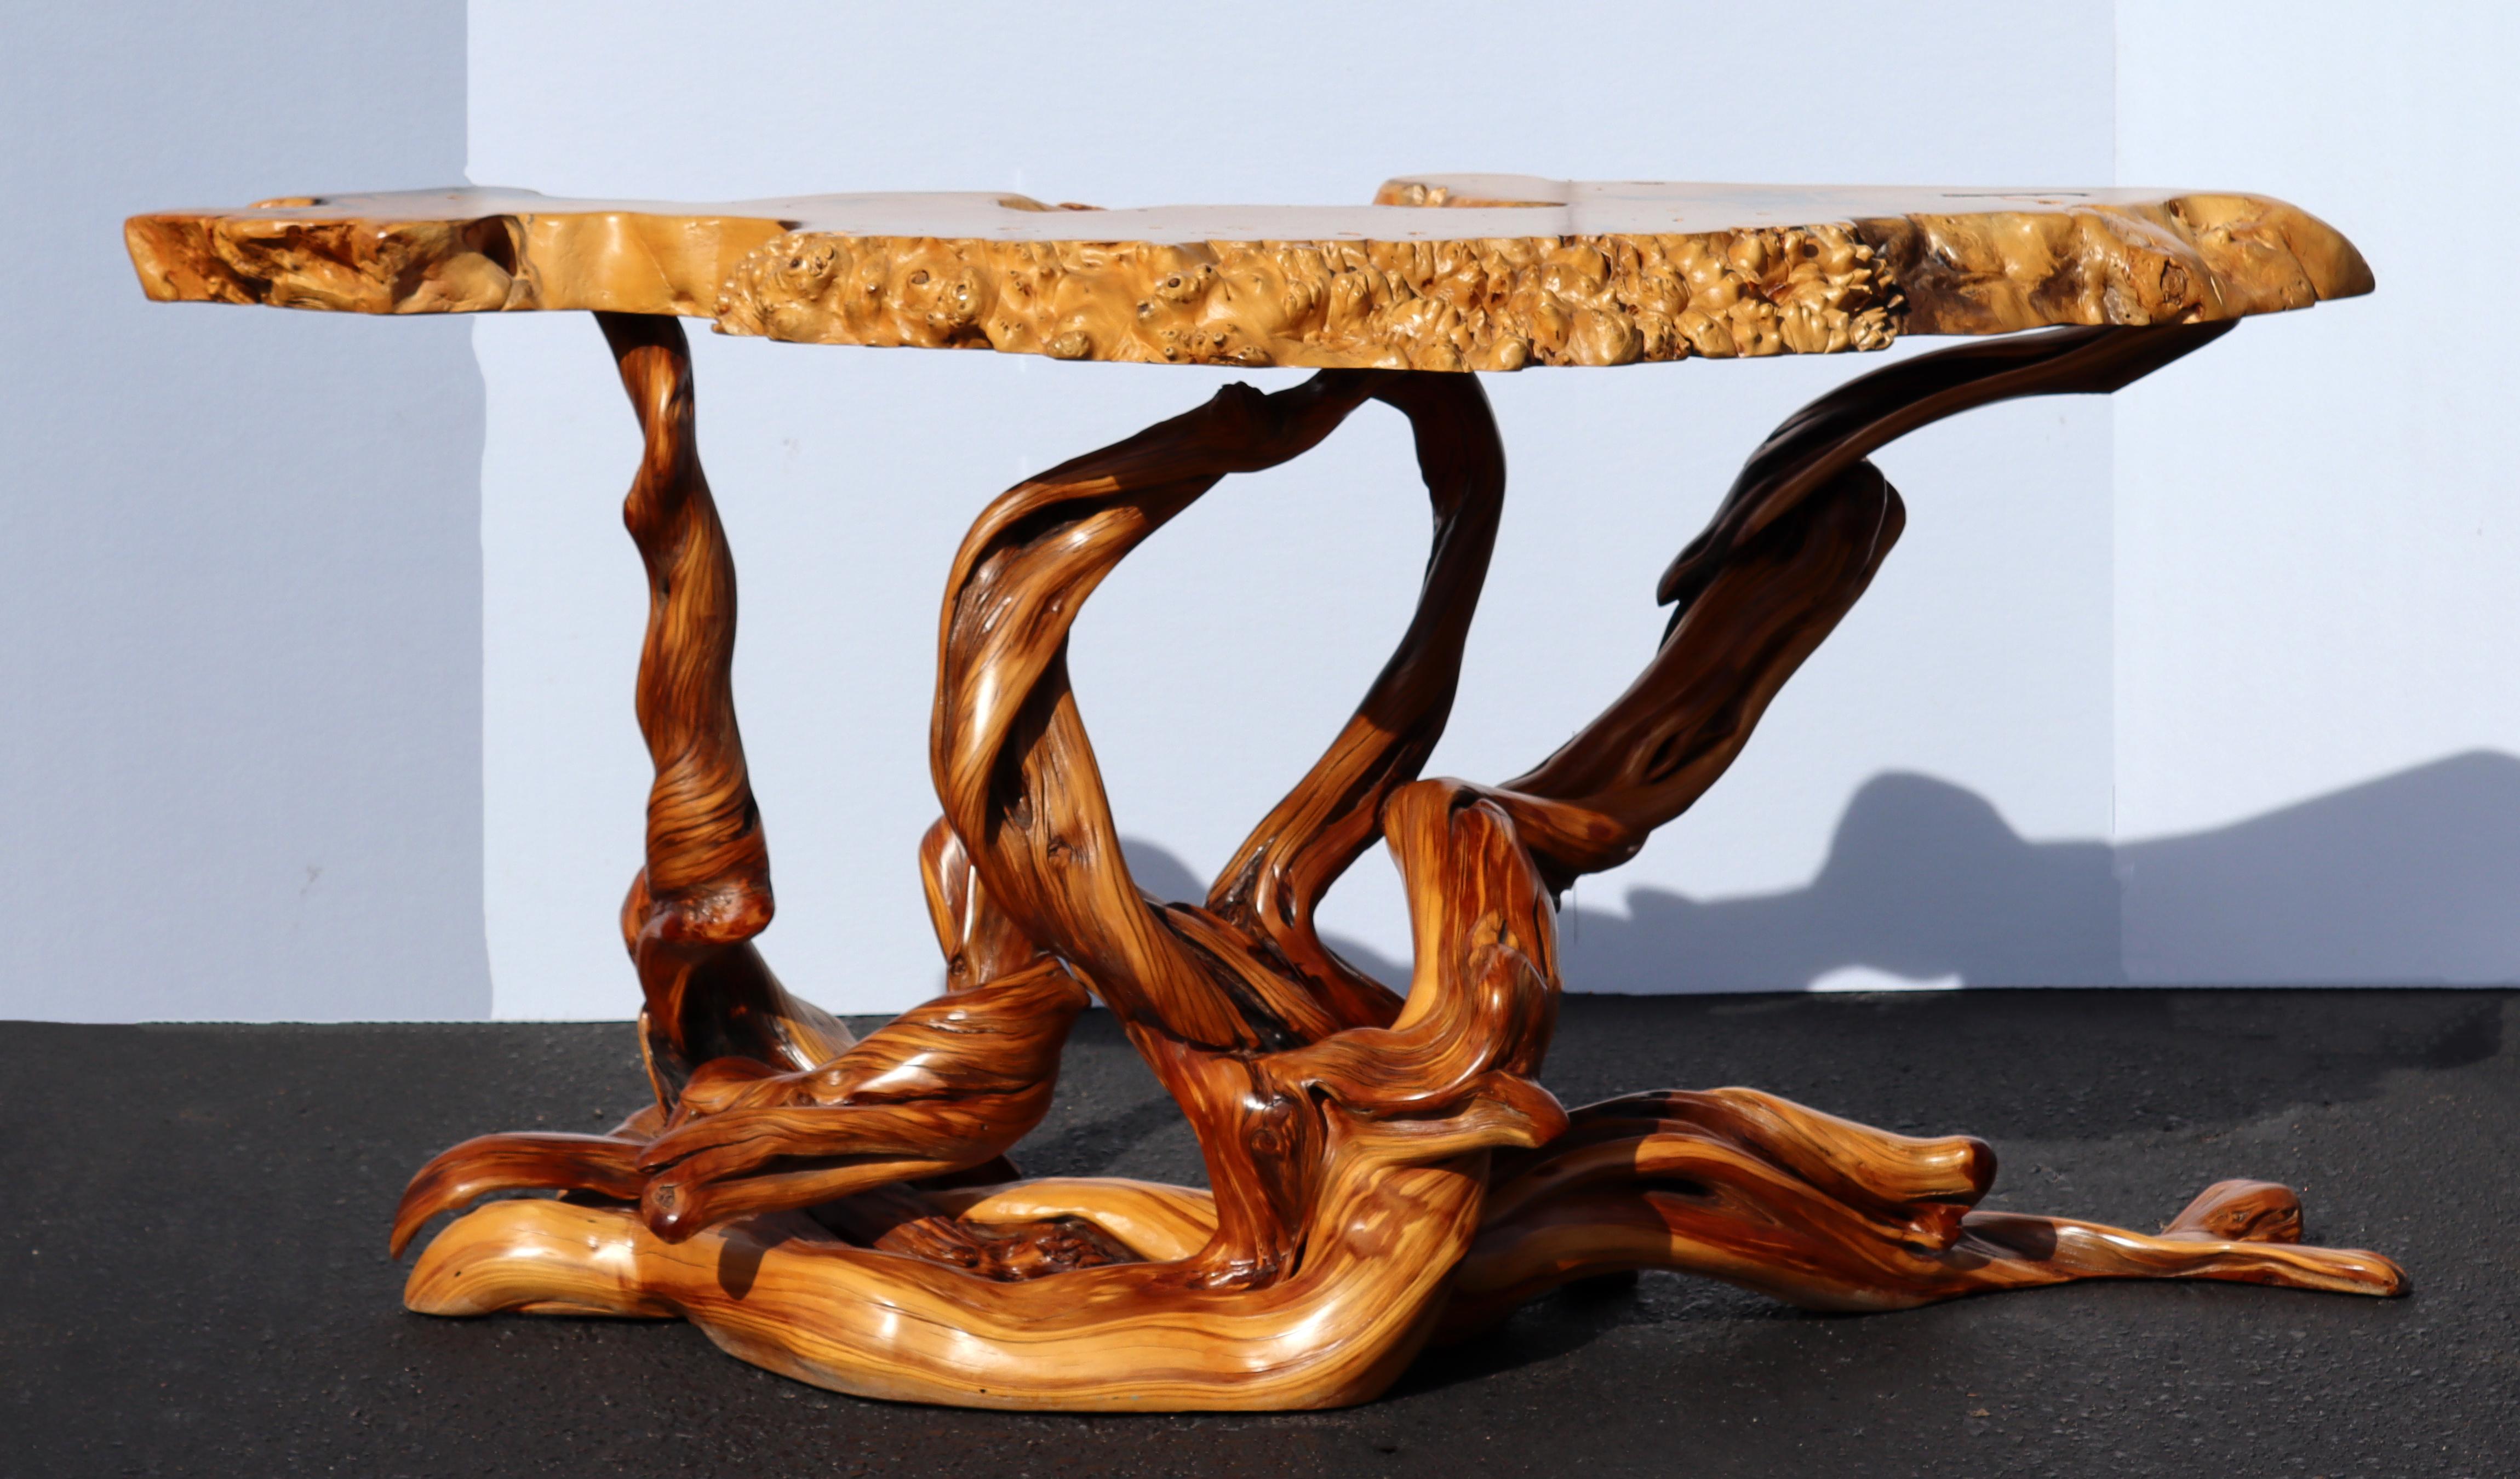 For your consideration is an incredible, root wood console table, with a glass top, circa the 1990s. In excellent condition. The dimensions are 62